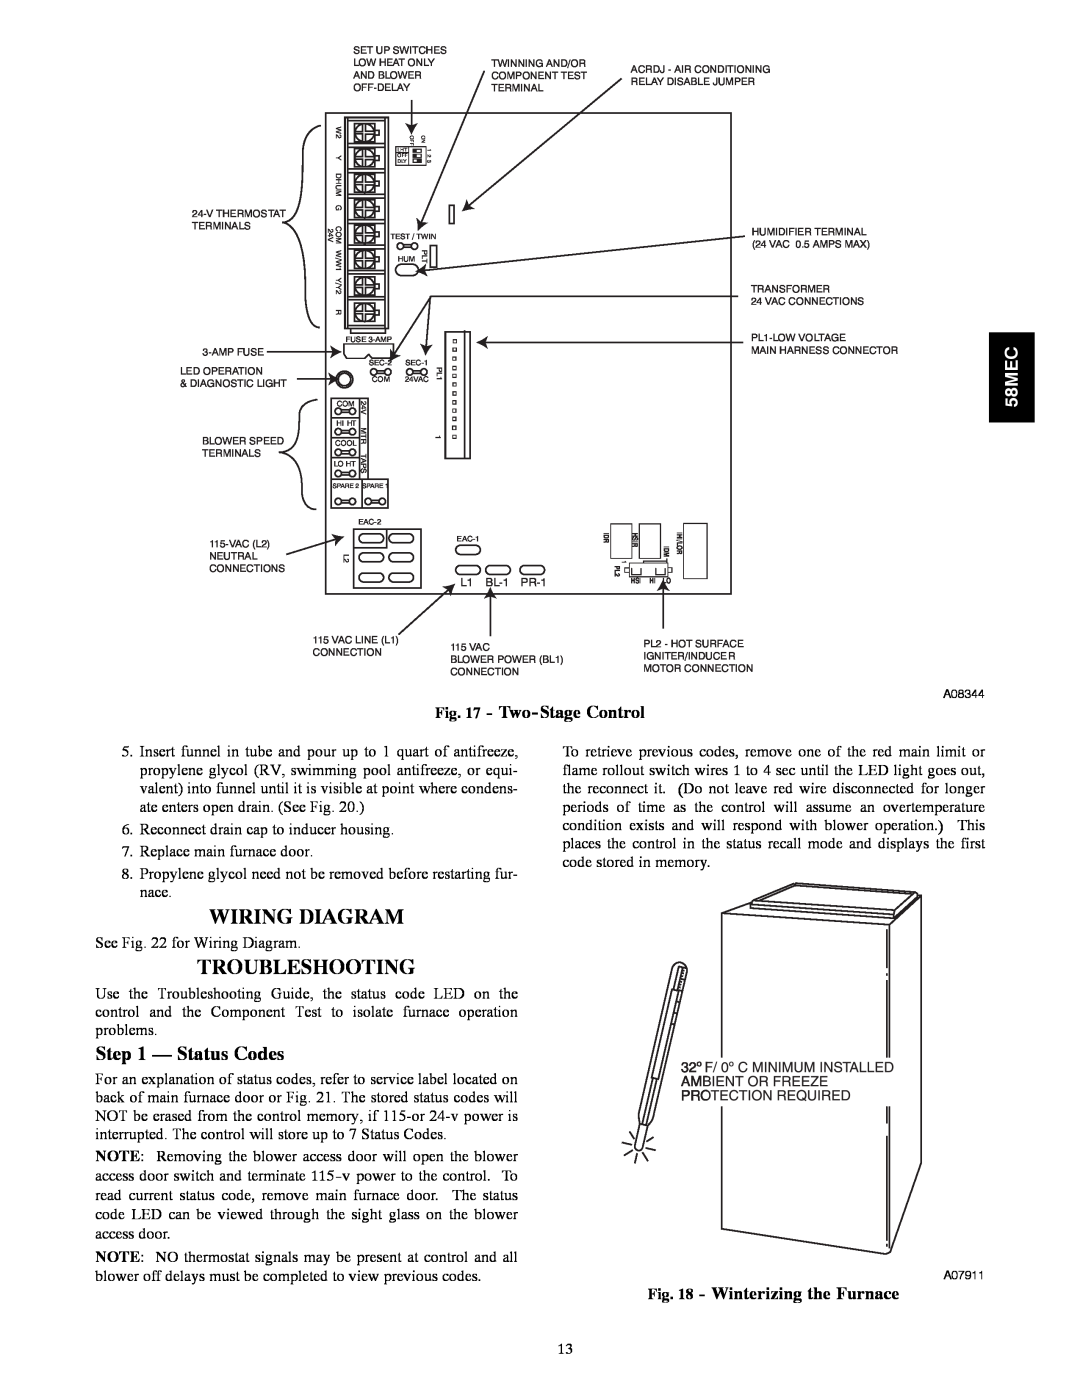 Carrier 58MEC instruction manual Wiring Diagram, Troubleshooting, Status Codes, Two-Stage Control, Winterizing the Furnace 